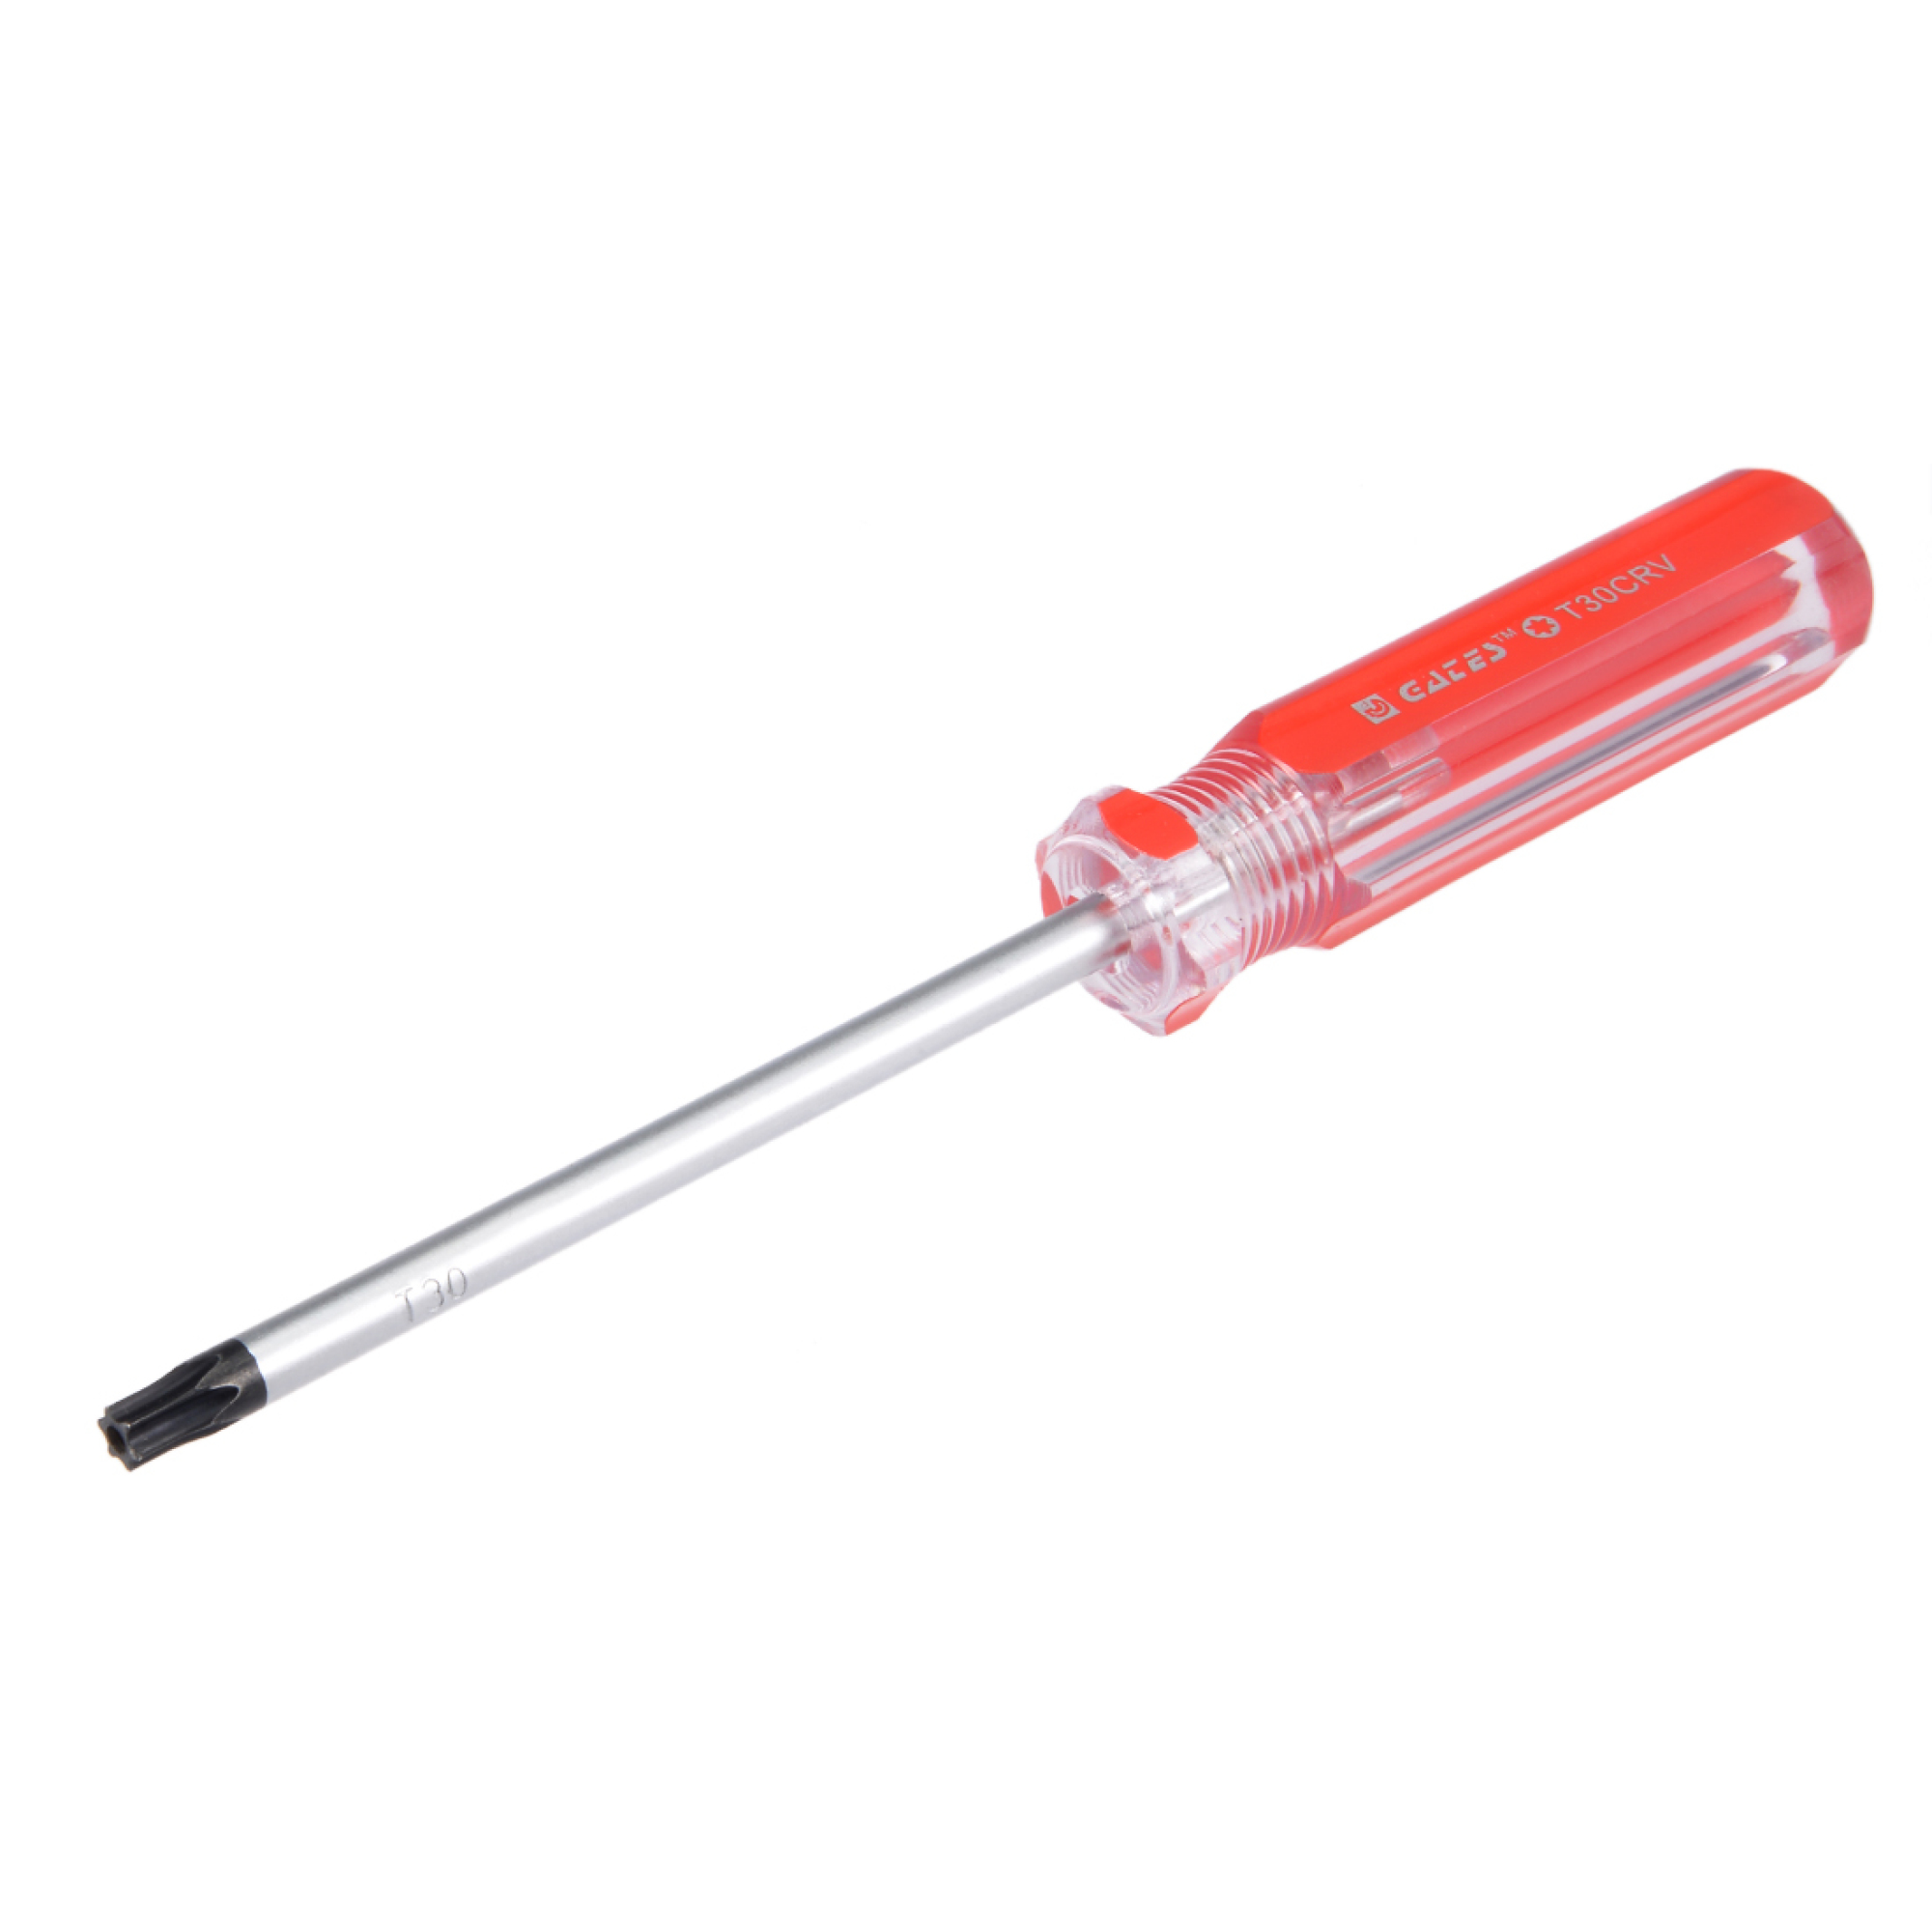 Torx Screwdriver T30 Magnetic Screw Driver with 4" Shaft